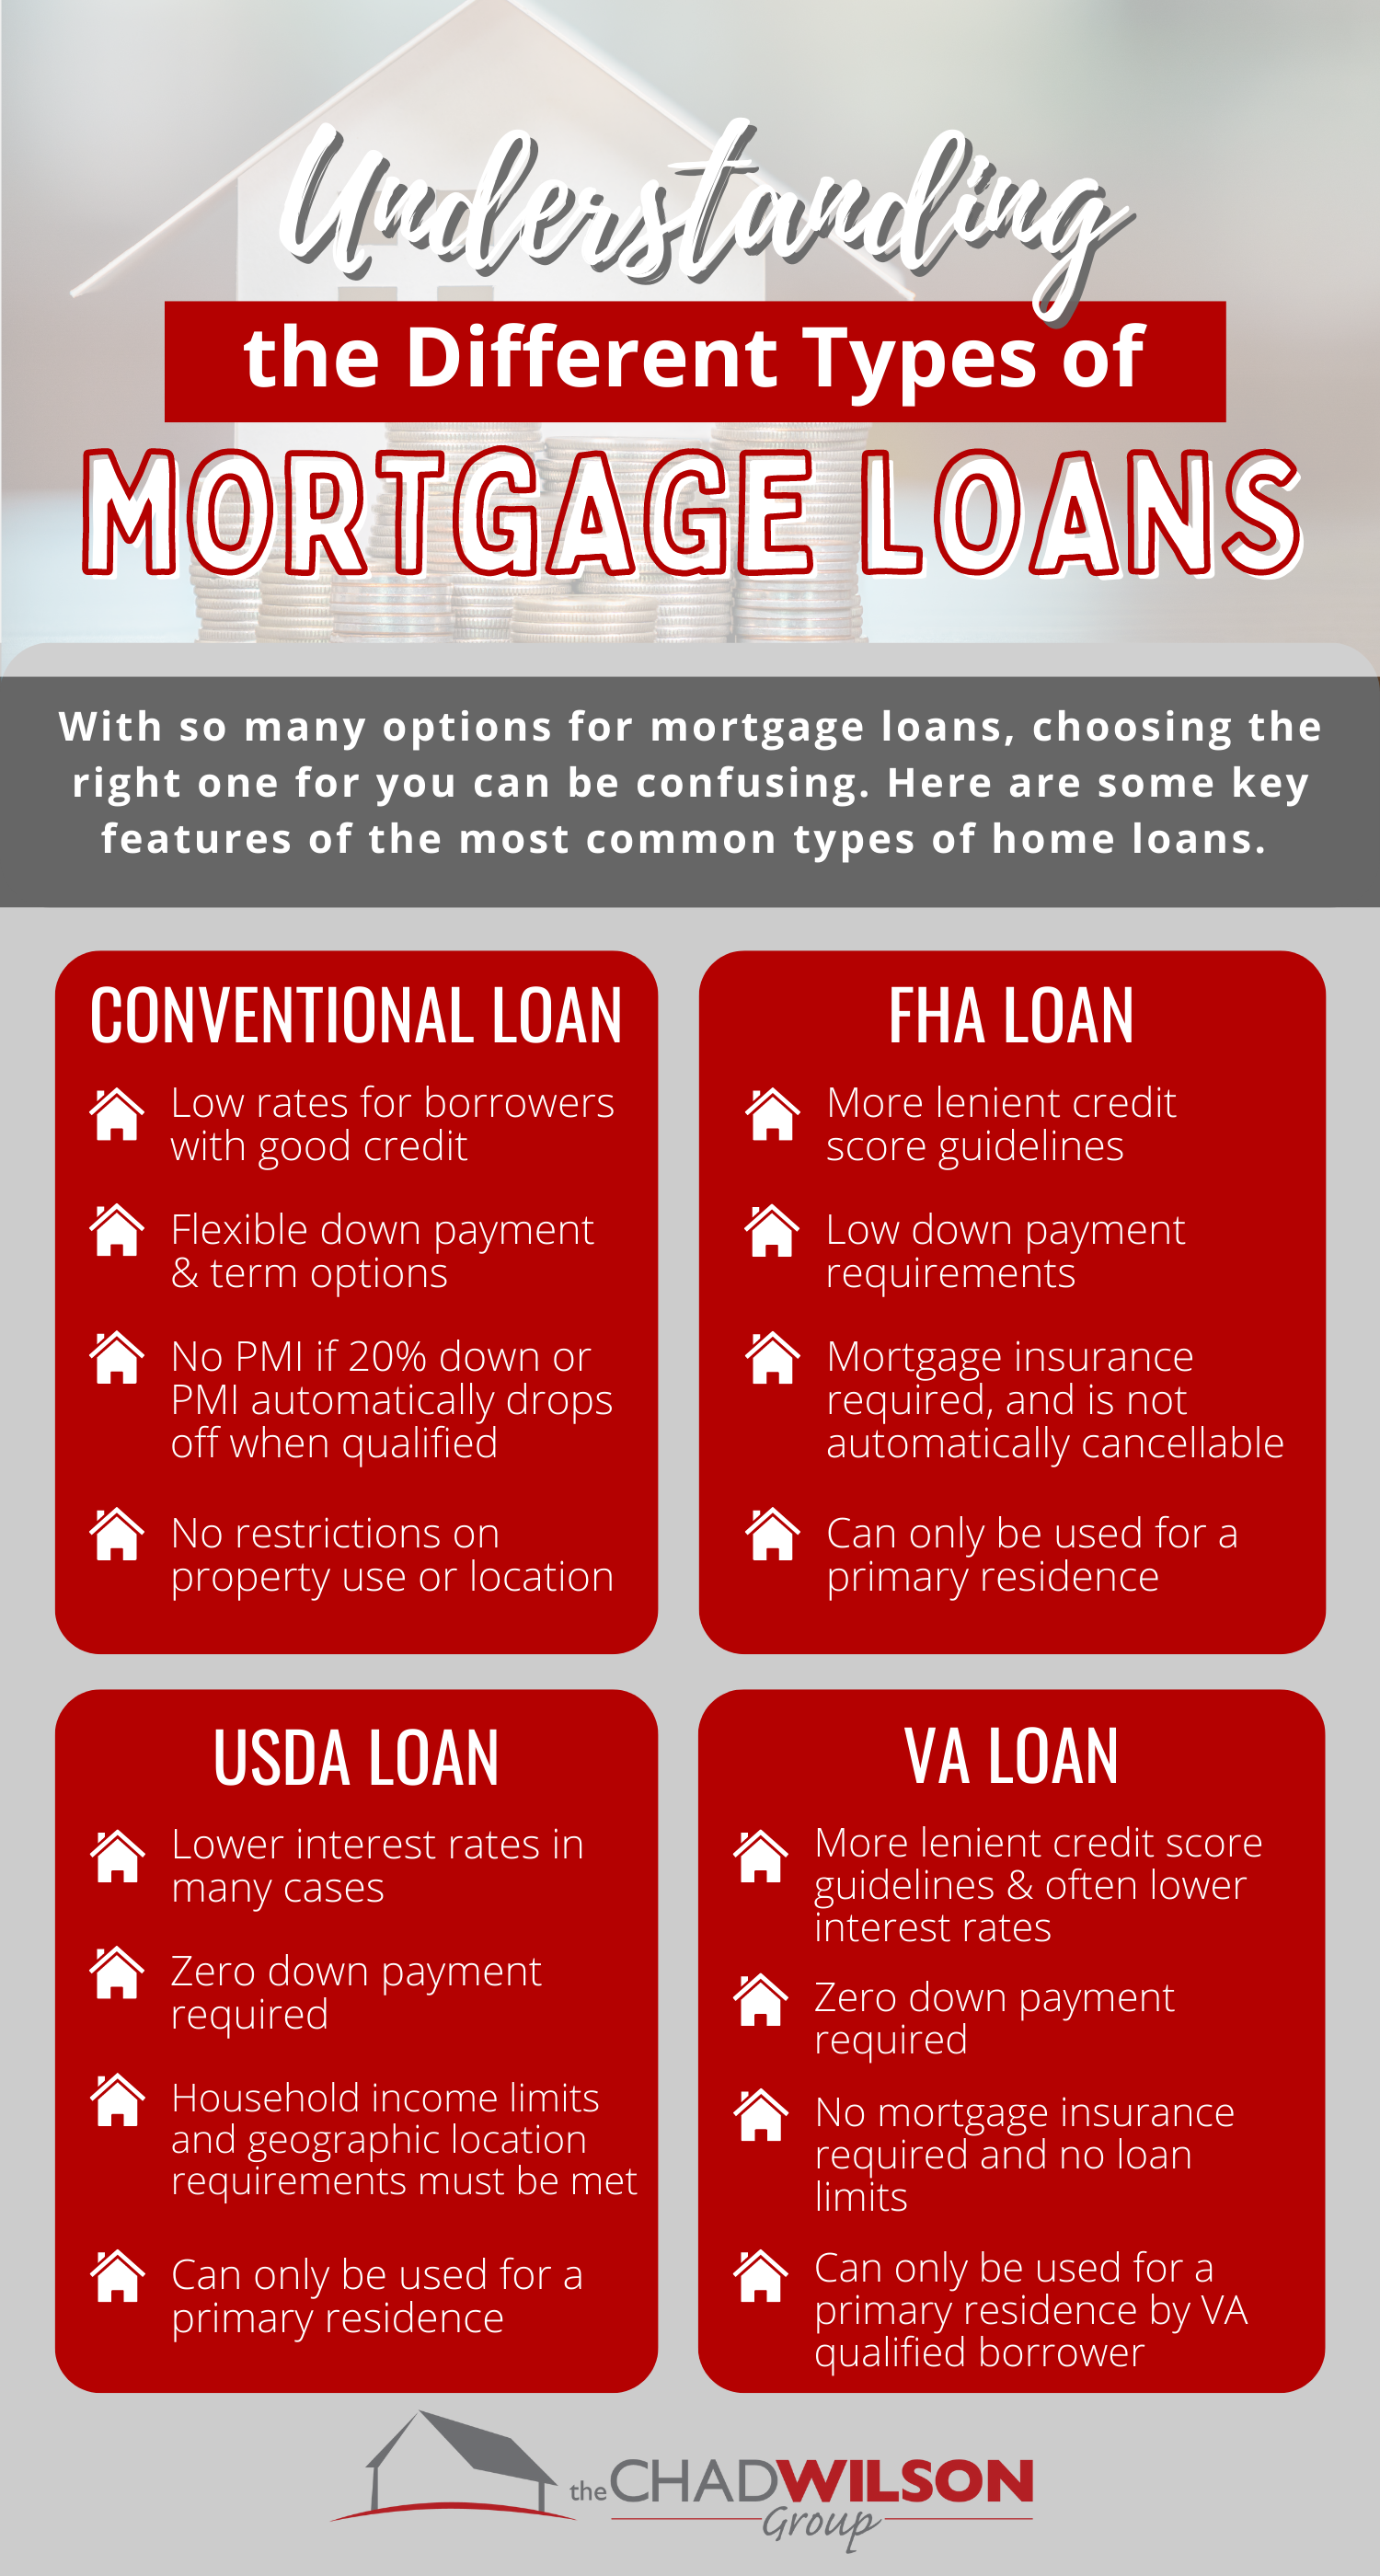 Understanding the Different Types of Mortgage Loans [INFOGRAPHIC]